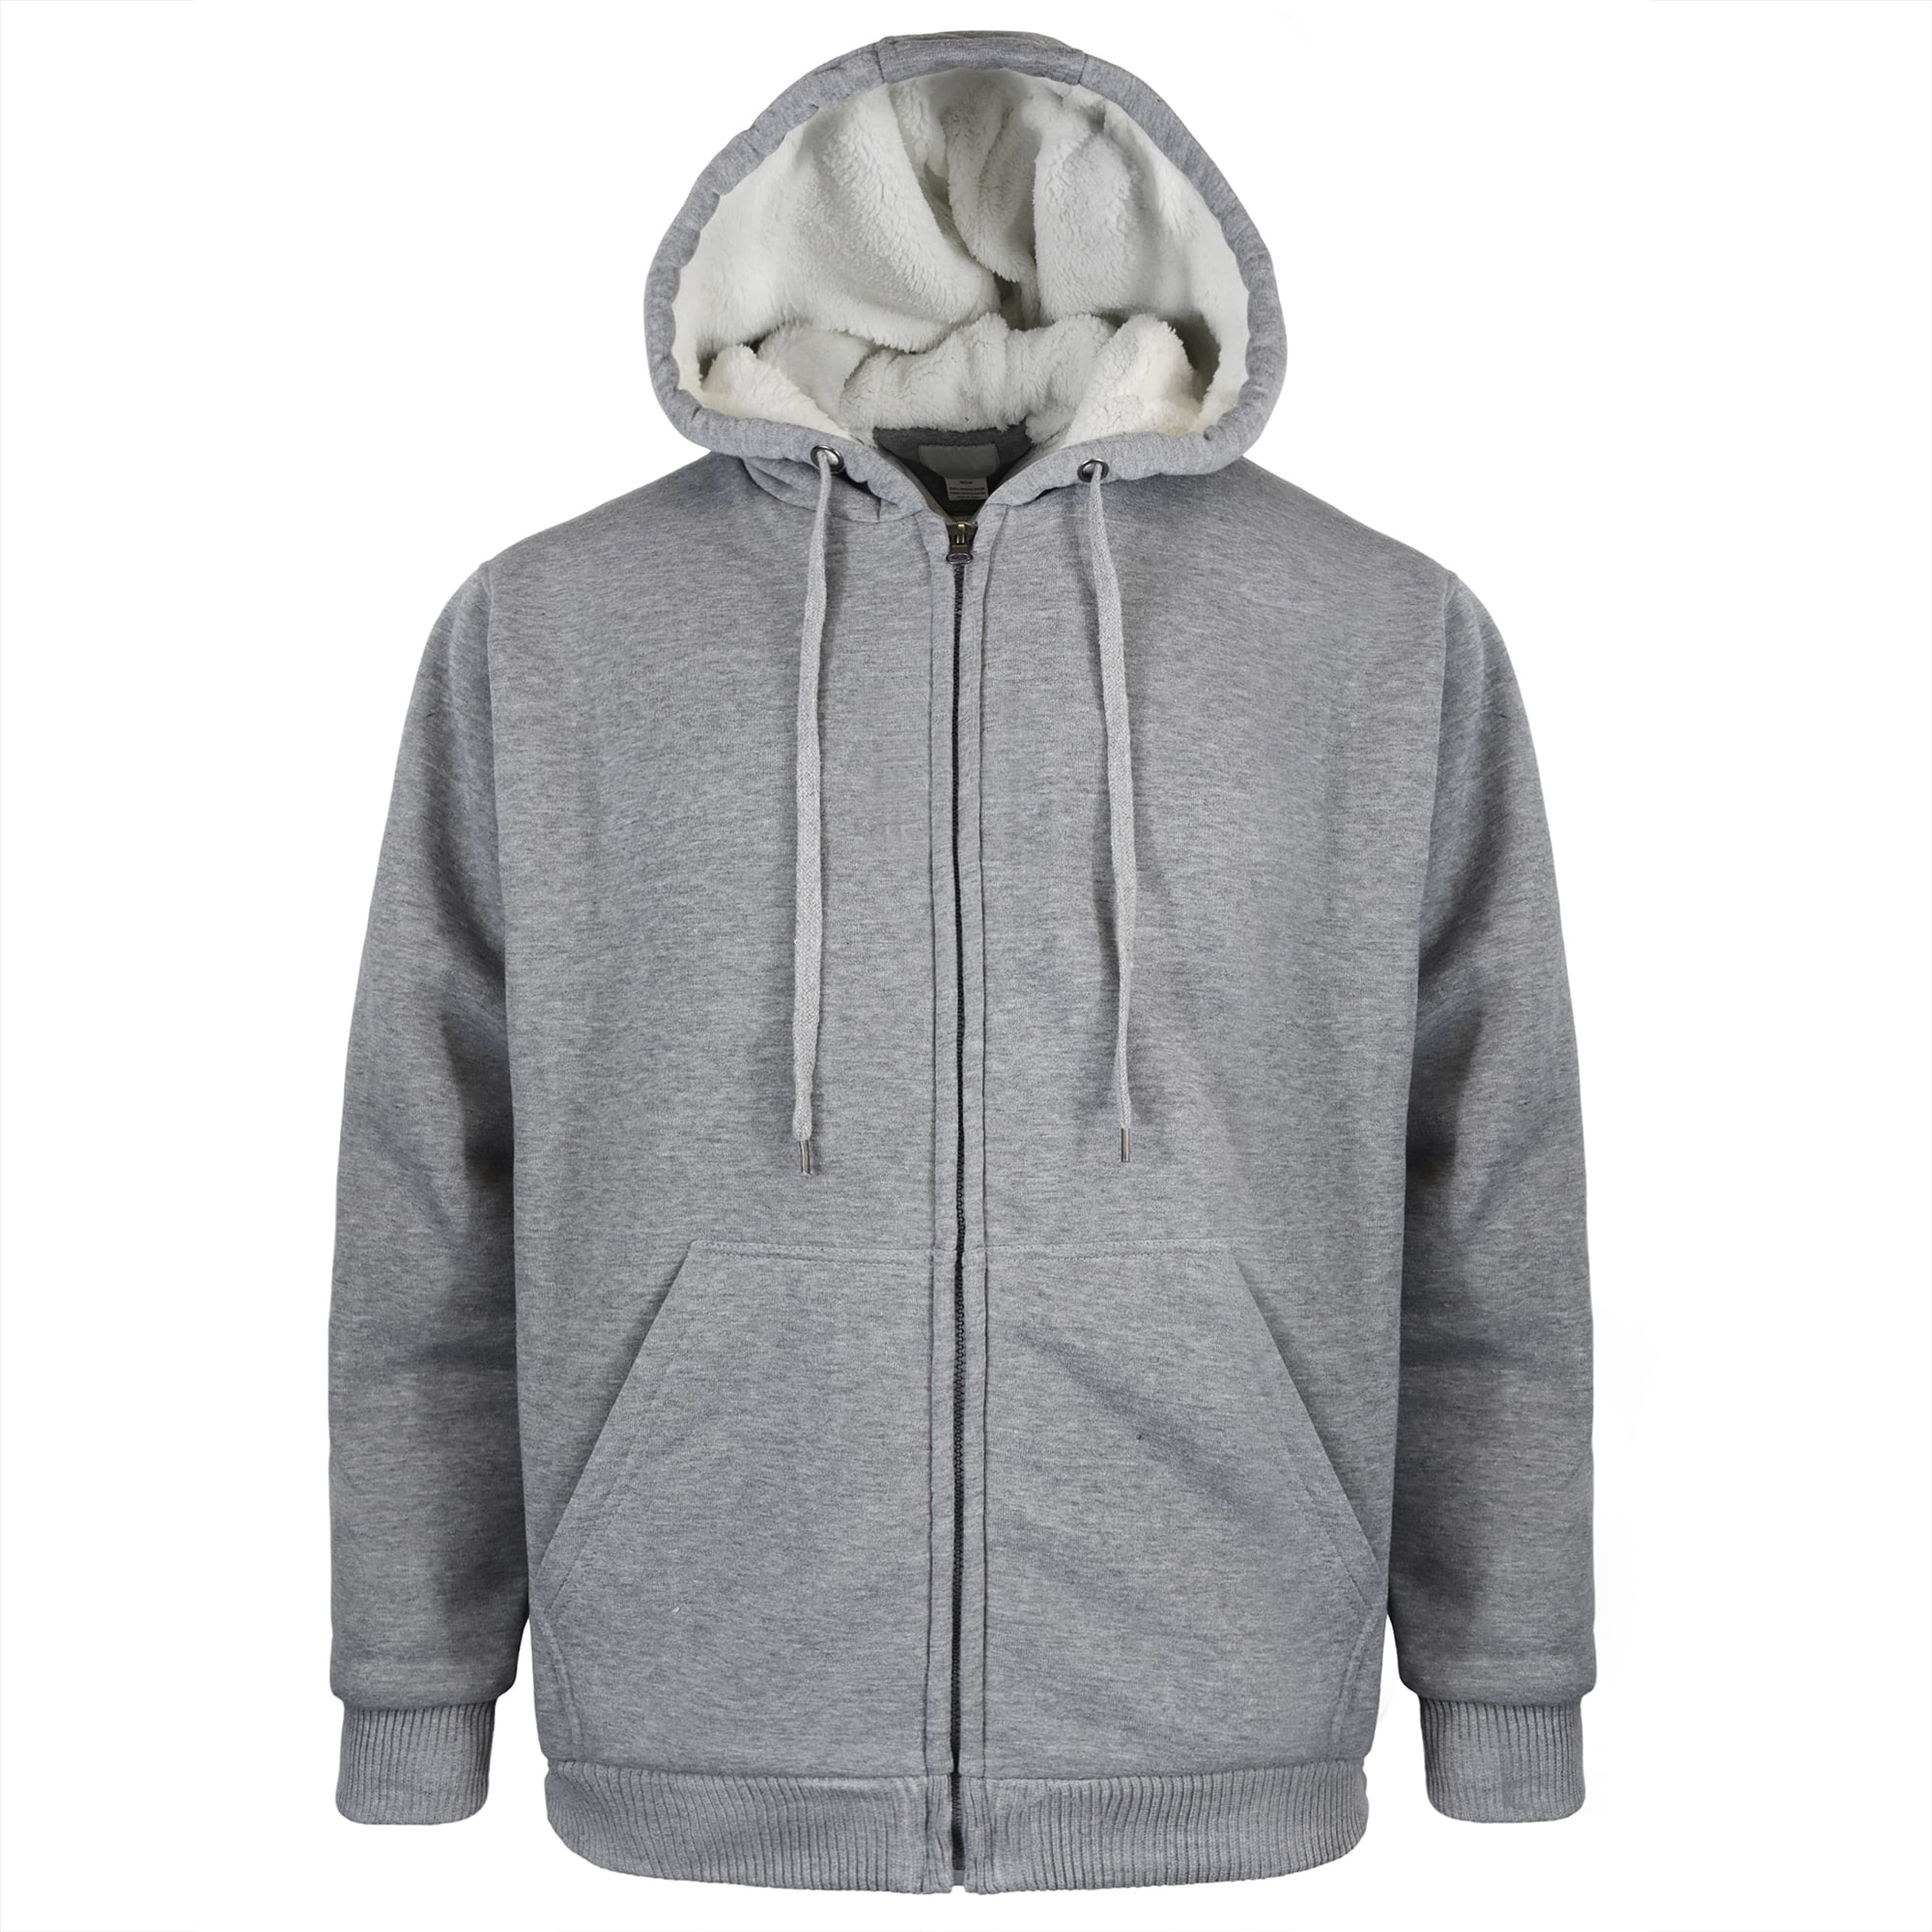 Victory Outfitters Men's Fleece Zip Up Hoodie with Soft Berber Lining ...